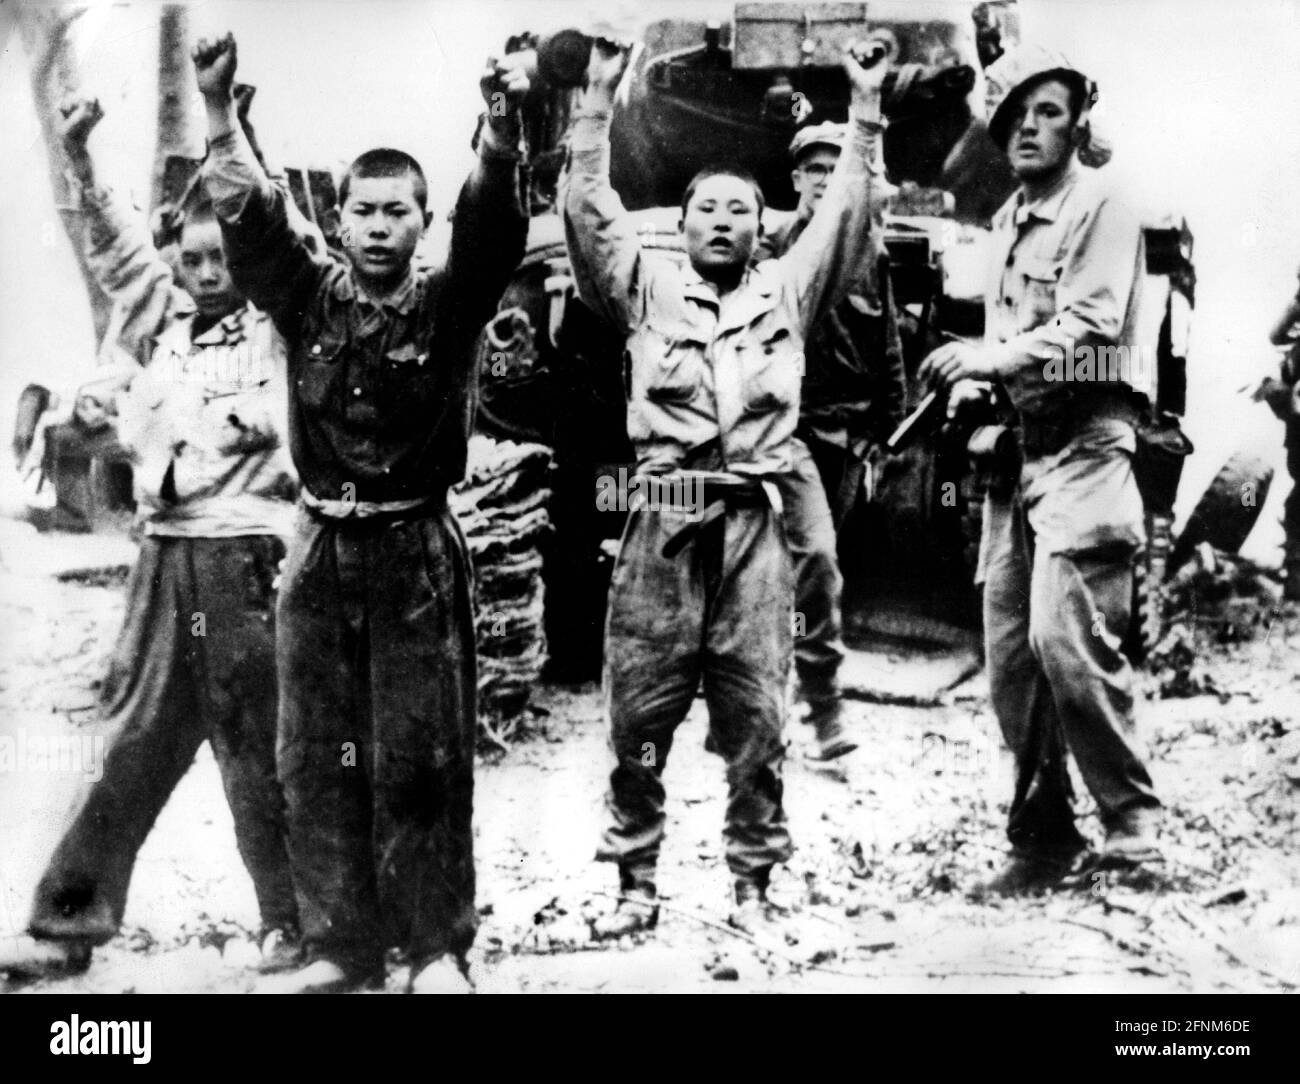 events, Korean War 1950 - 1953, US soldier with captured North Korean soldiers, 1950, POWs, POW, ADDITIONAL-RIGHTS-CLEARANCE-INFO-NOT-AVAILABLE Stock Photo